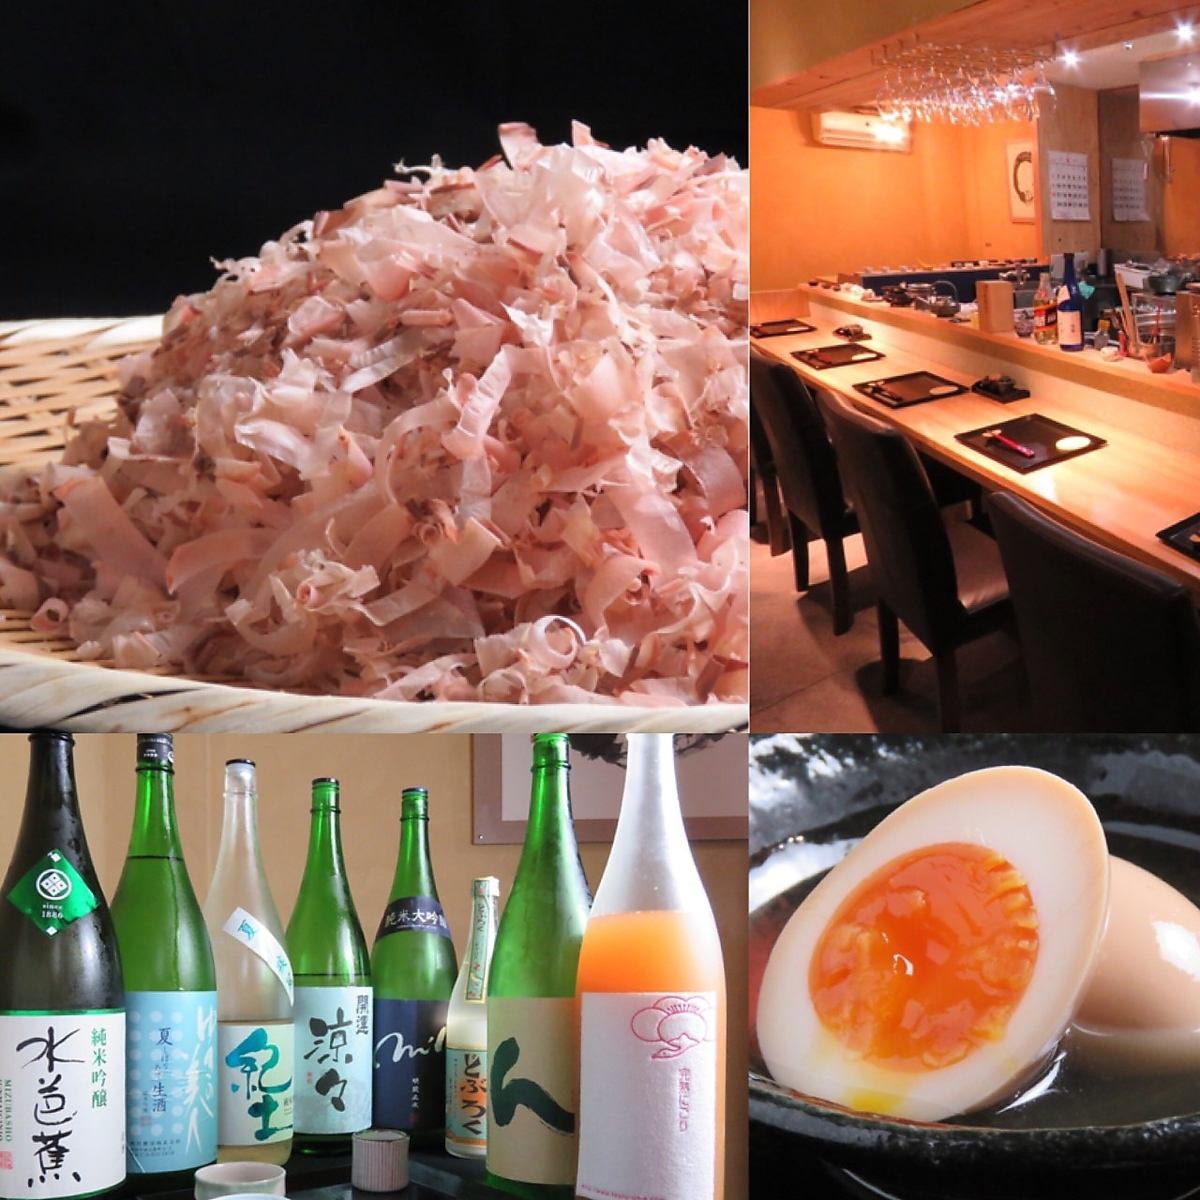 The "dashi" made from freshly cut bonito flakes is delicious! A restaurant where you can enjoy elegant Japanese dishes such as oden and fresh fish.